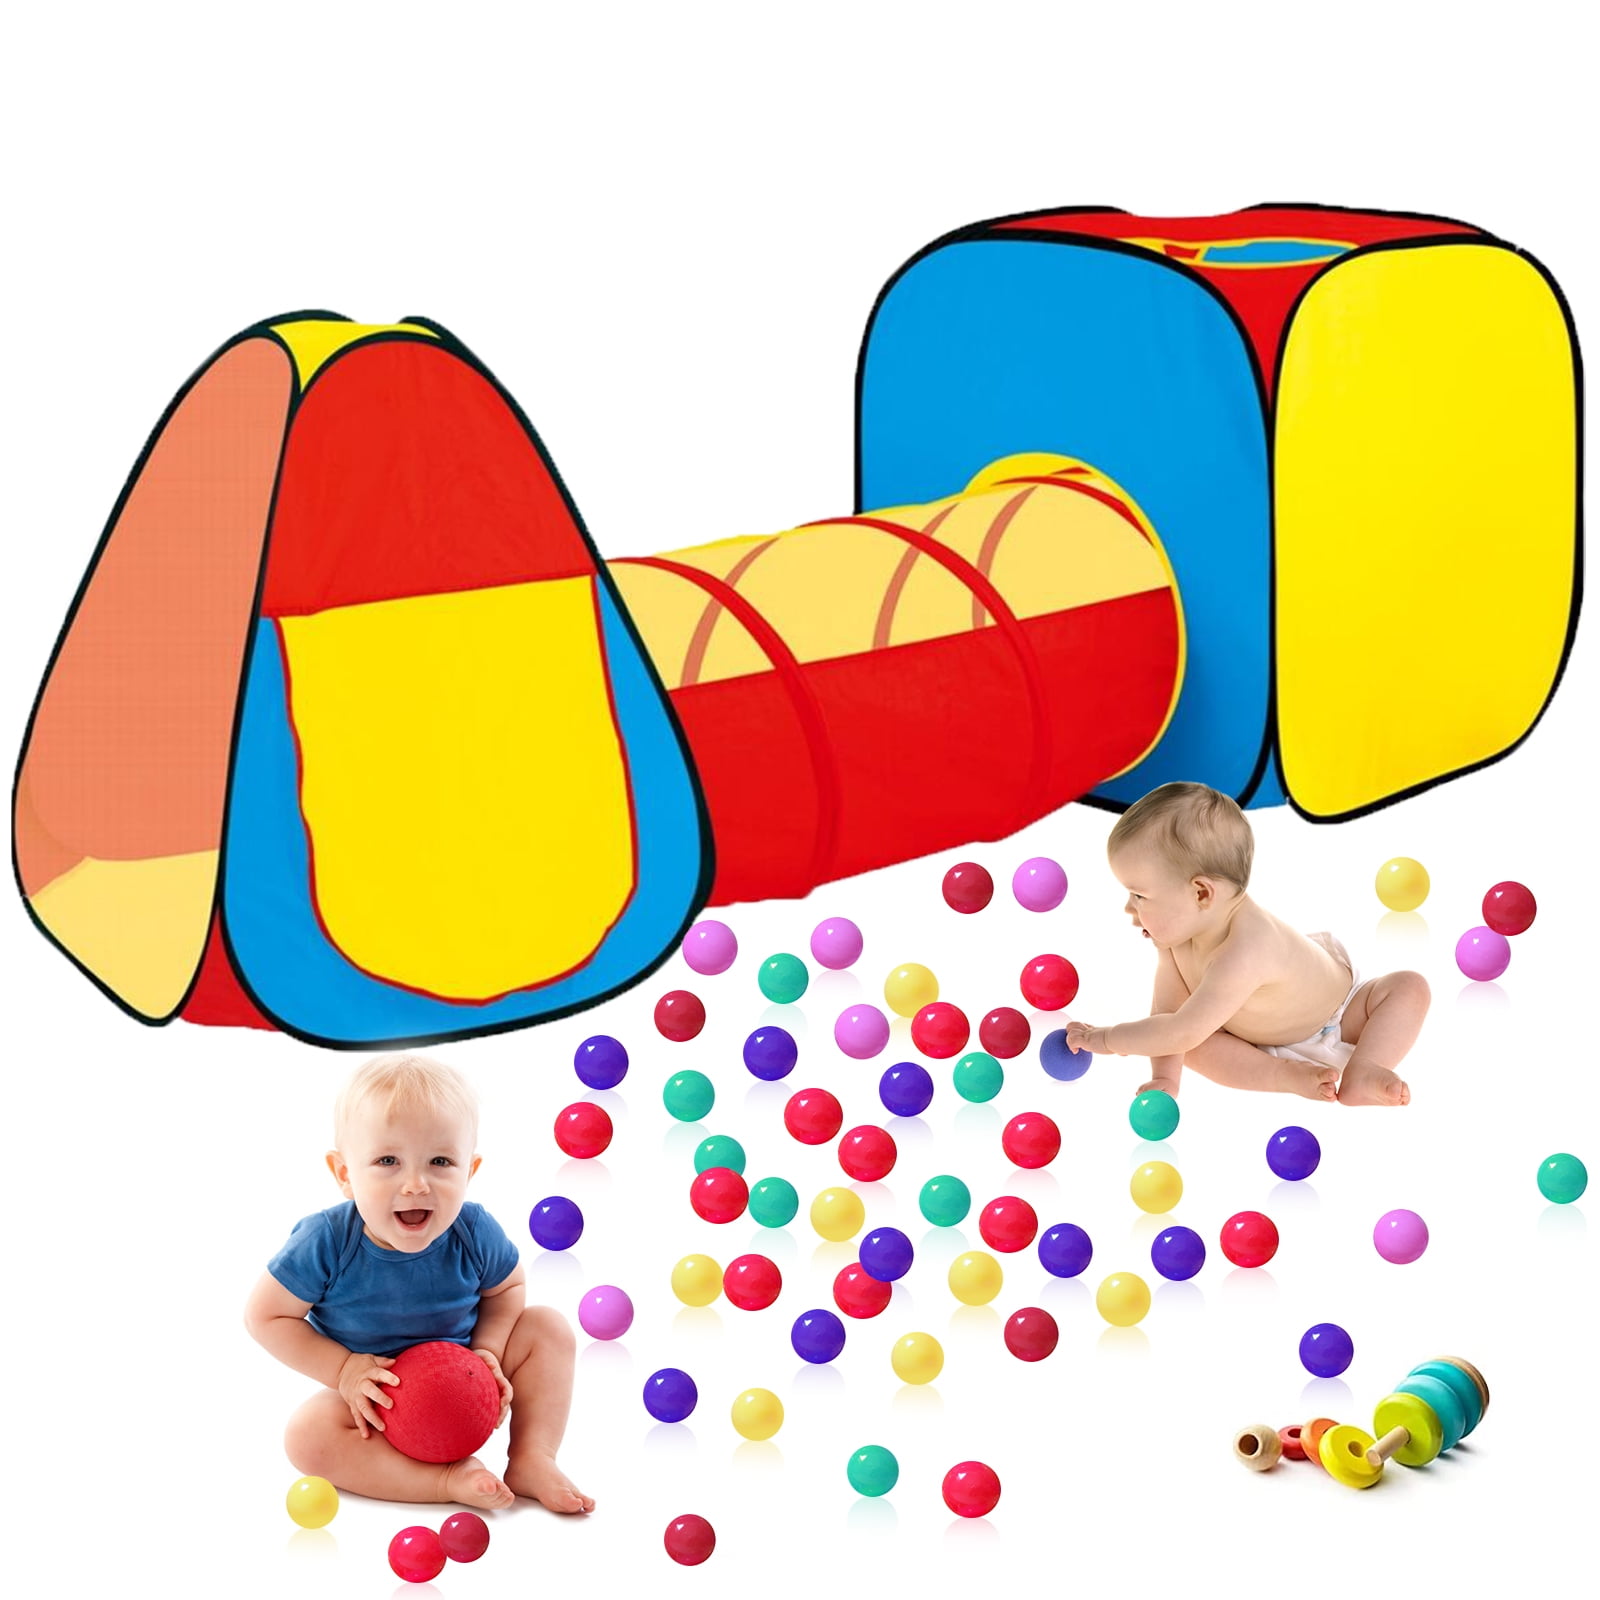 Ocean Ball Pool Foldable Play Tent 3 in 1 Play Tent Fence Tunnel Play House 